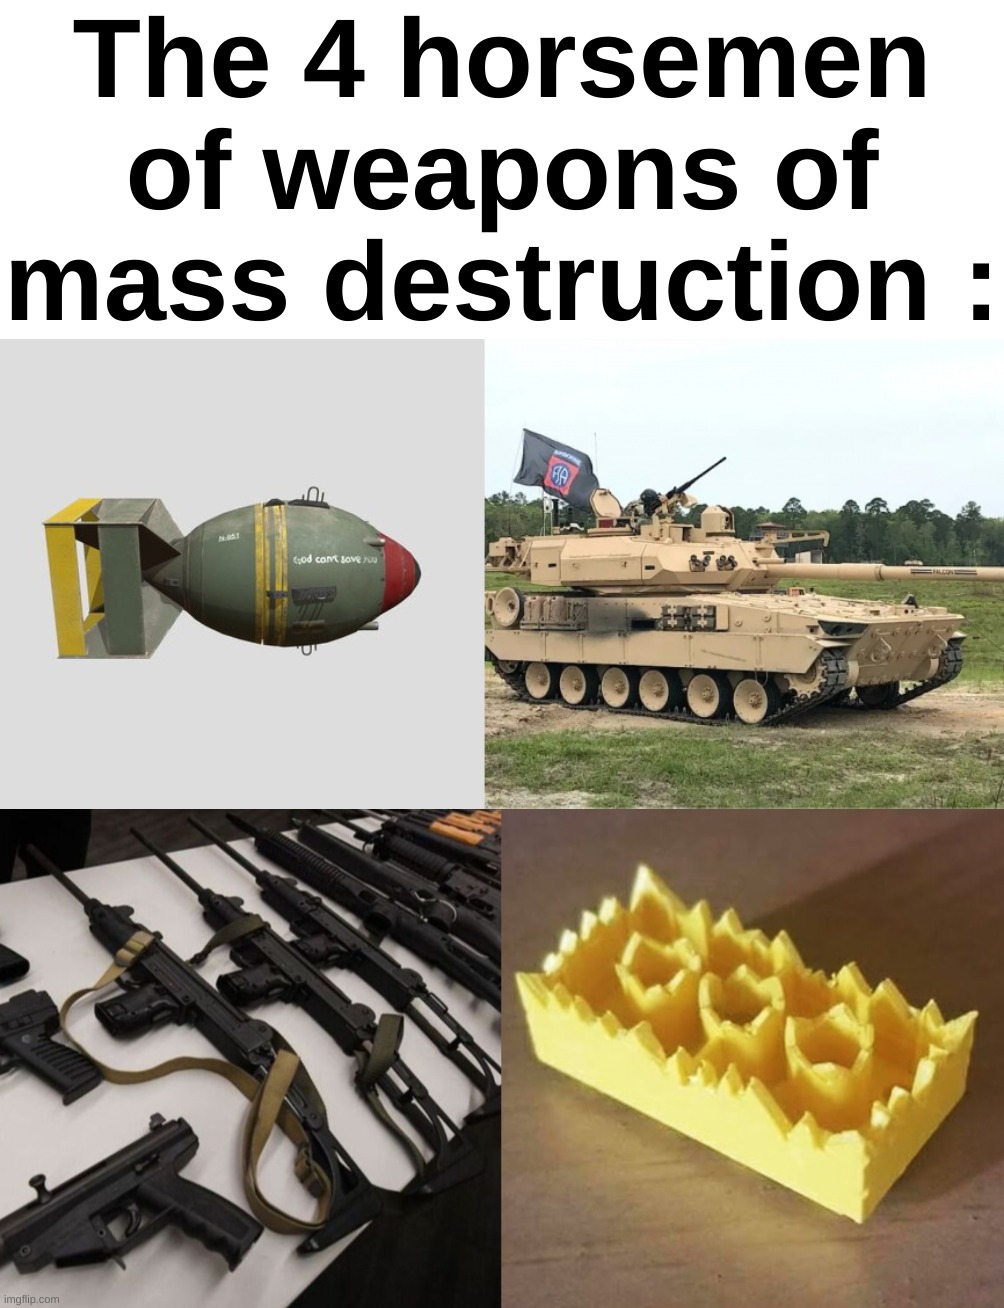 Especially the 4th one | The 4 horsemen of weapons of mass destruction : | image tagged in memes,funny,lego,cursed,weapons,front page plz | made w/ Imgflip meme maker